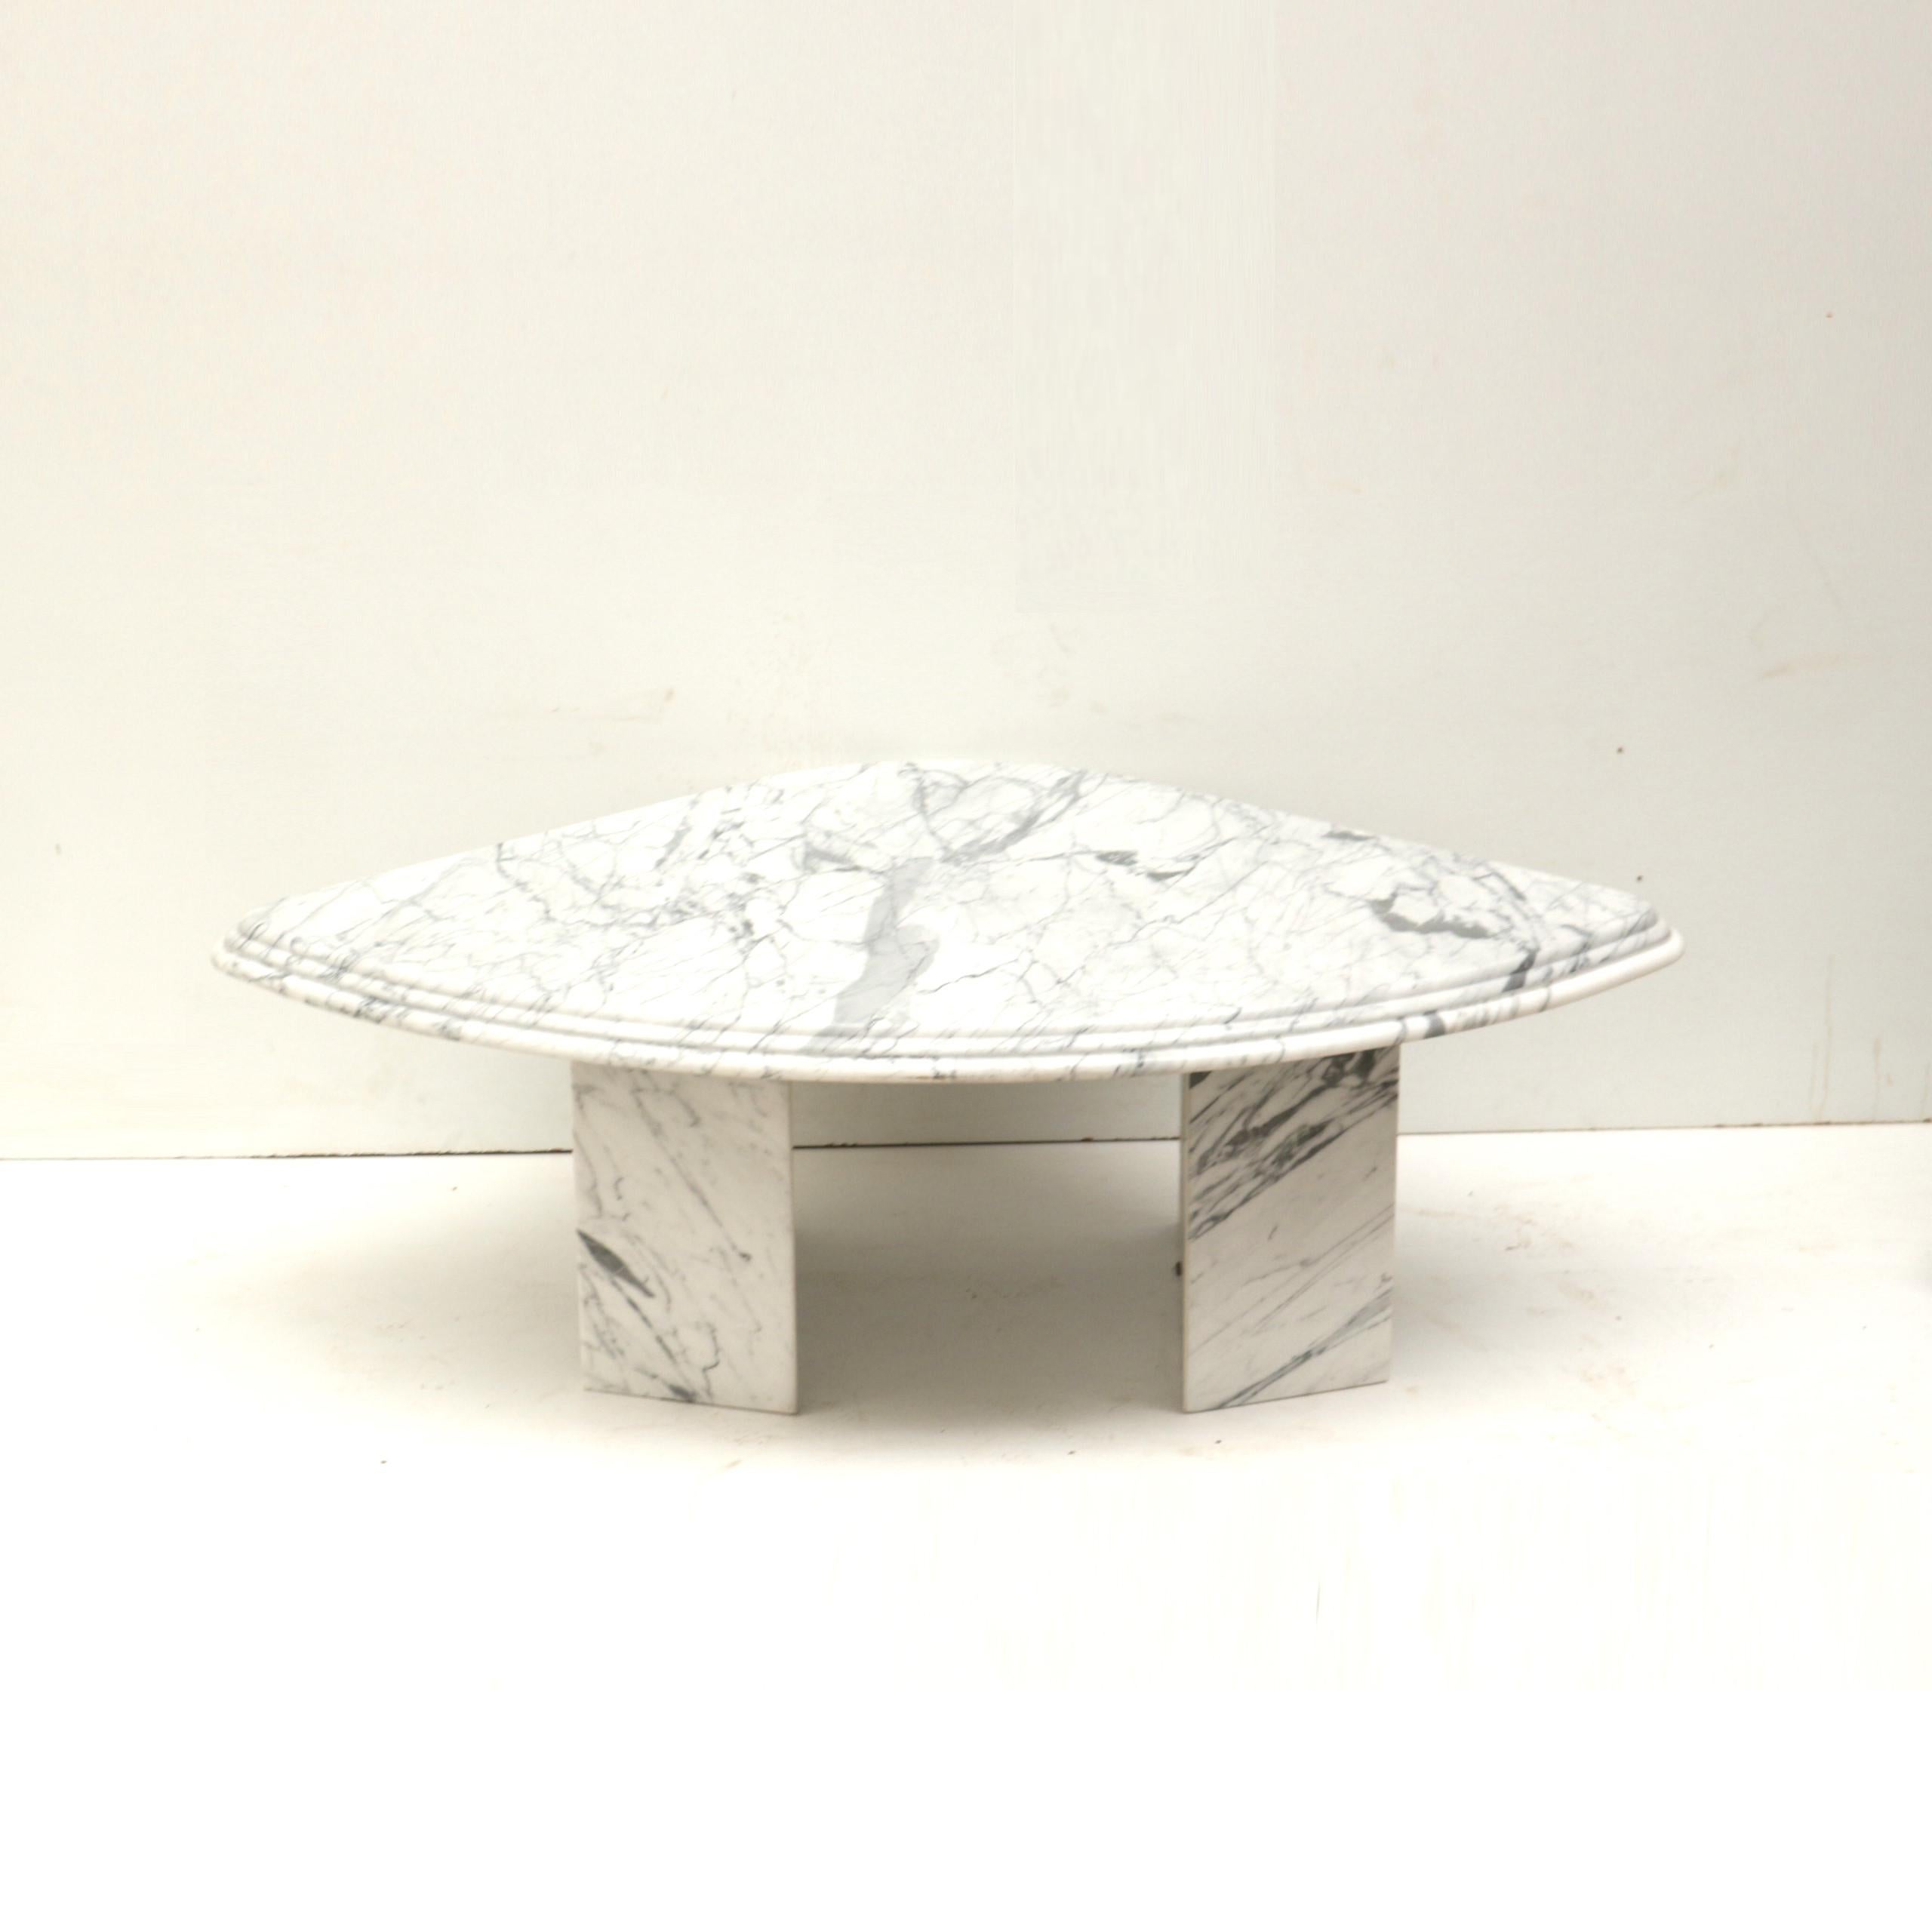 Vintage Italian marble coffee table from the 1970s.

Dimensions:
Width: 129.5 cm
Depth: 91 cm
Height: 42 cm

There are some small scratches on the top.